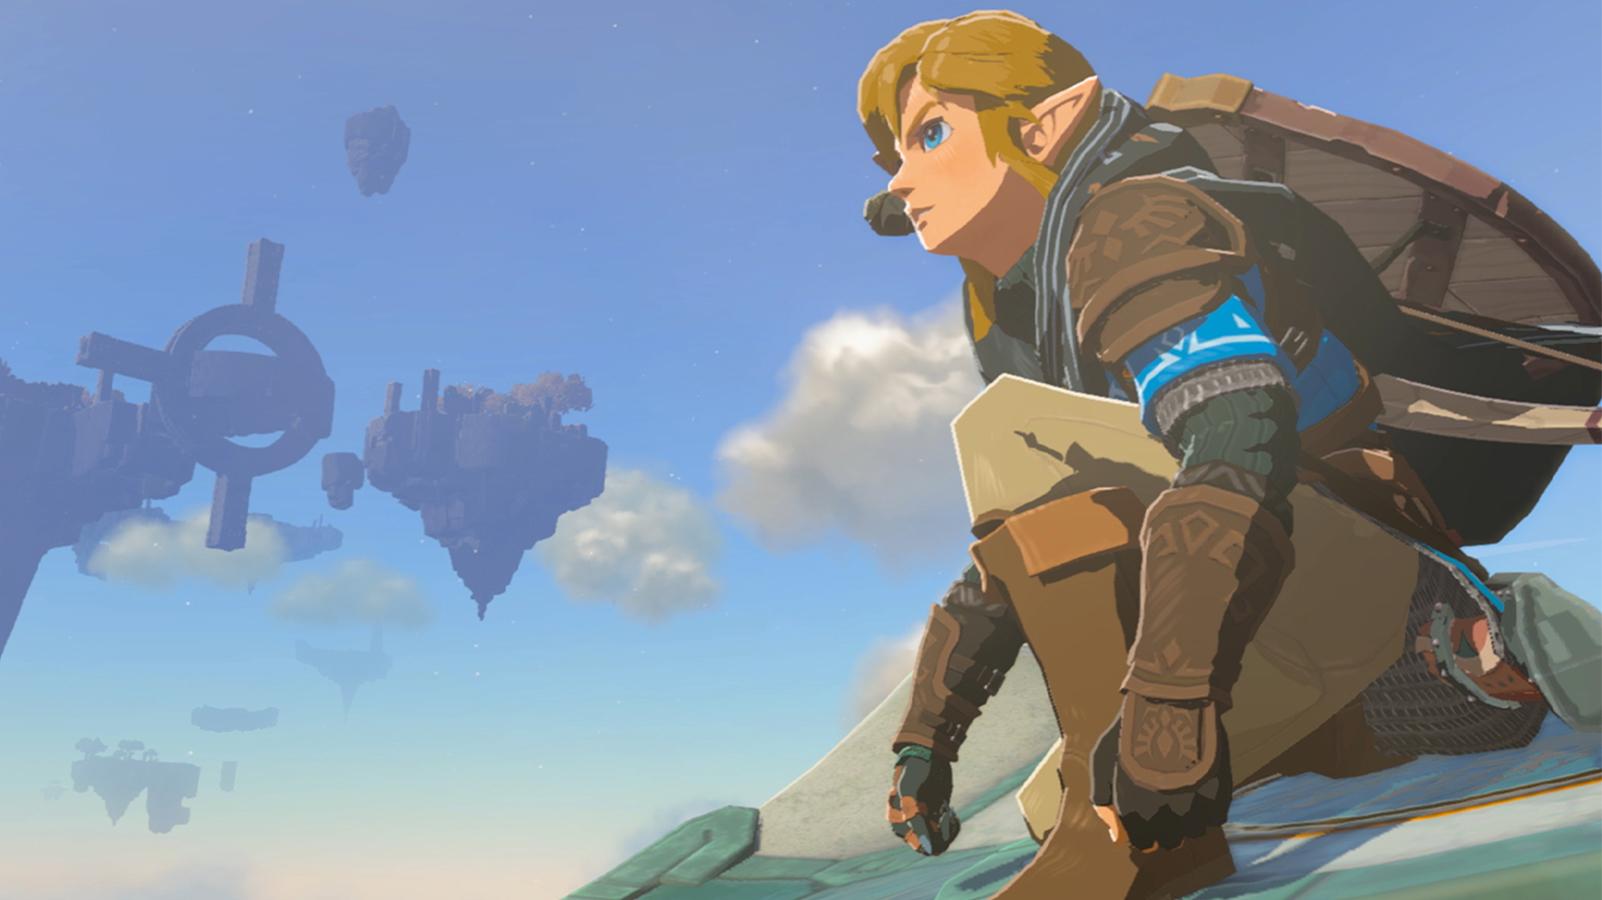 The Legend of Zelda is getting a live-action film from Nintendo and Sony